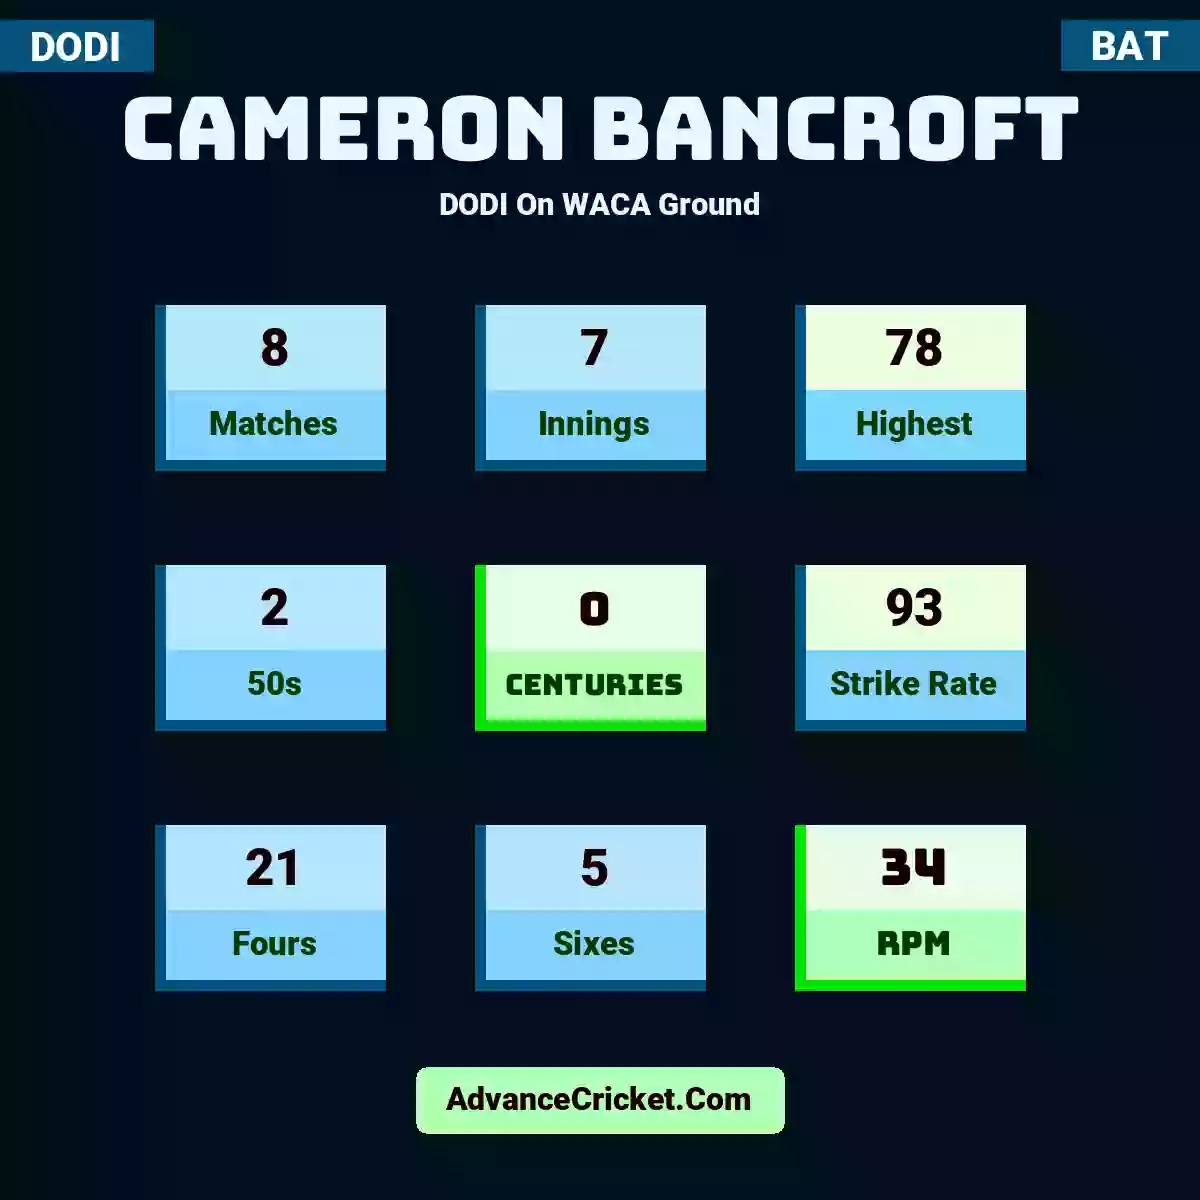 Cameron Bancroft DODI  On WACA Ground, Cameron Bancroft played 8 matches, scored 78 runs as highest, 2 half-centuries, and 0 centuries, with a strike rate of 93. C.Bancroft hit 21 fours and 5 sixes, with an RPM of 34.